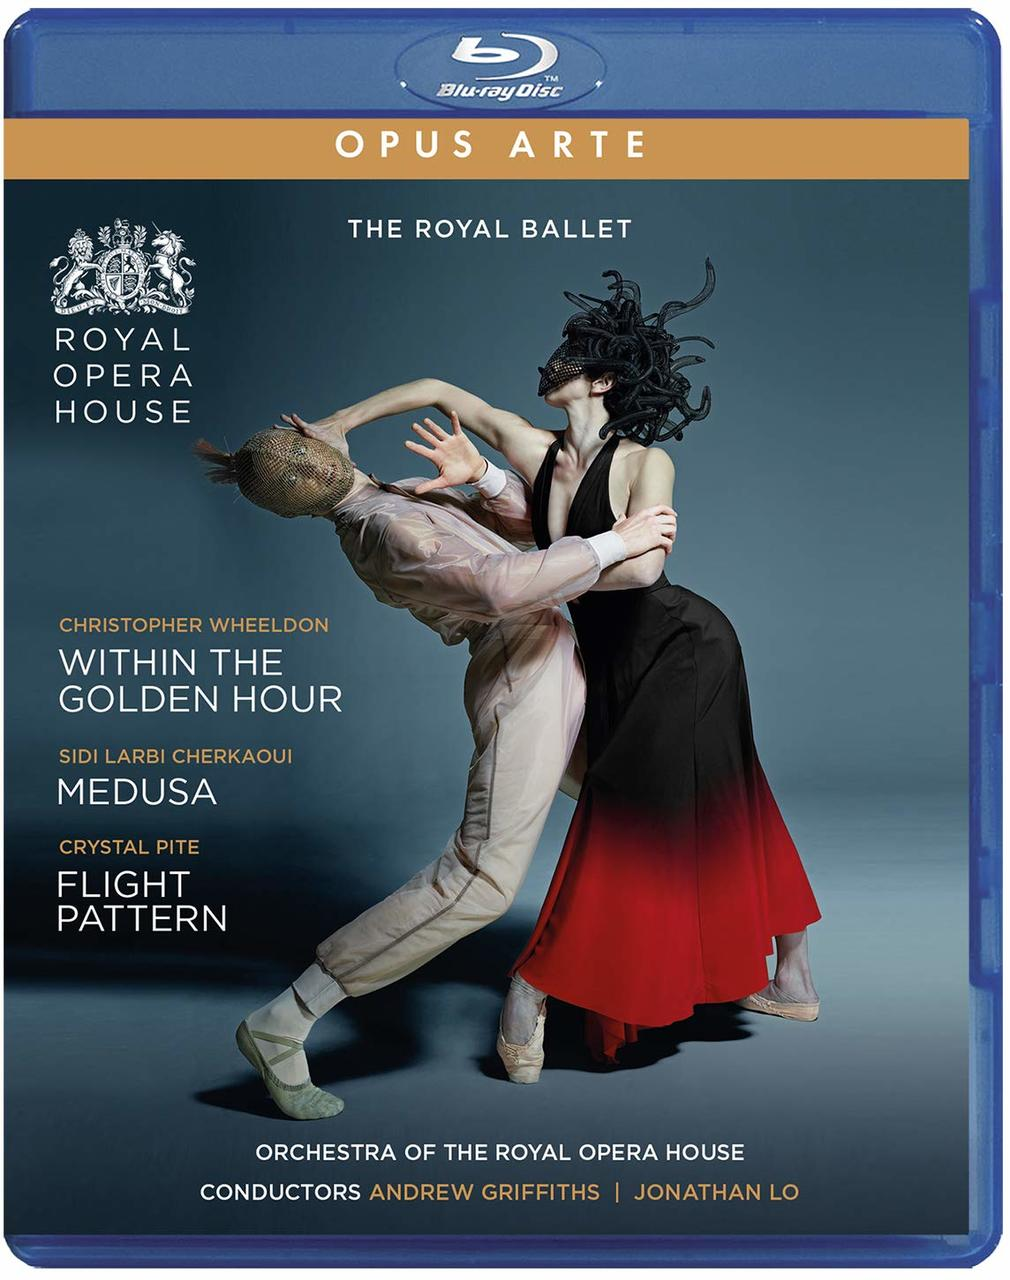 THE HOUR Jonathan MEDUSA (Blu-ray) - House - Royal The Opera Orchestra Lo, GOLDEN WITHIN Of FLIGH